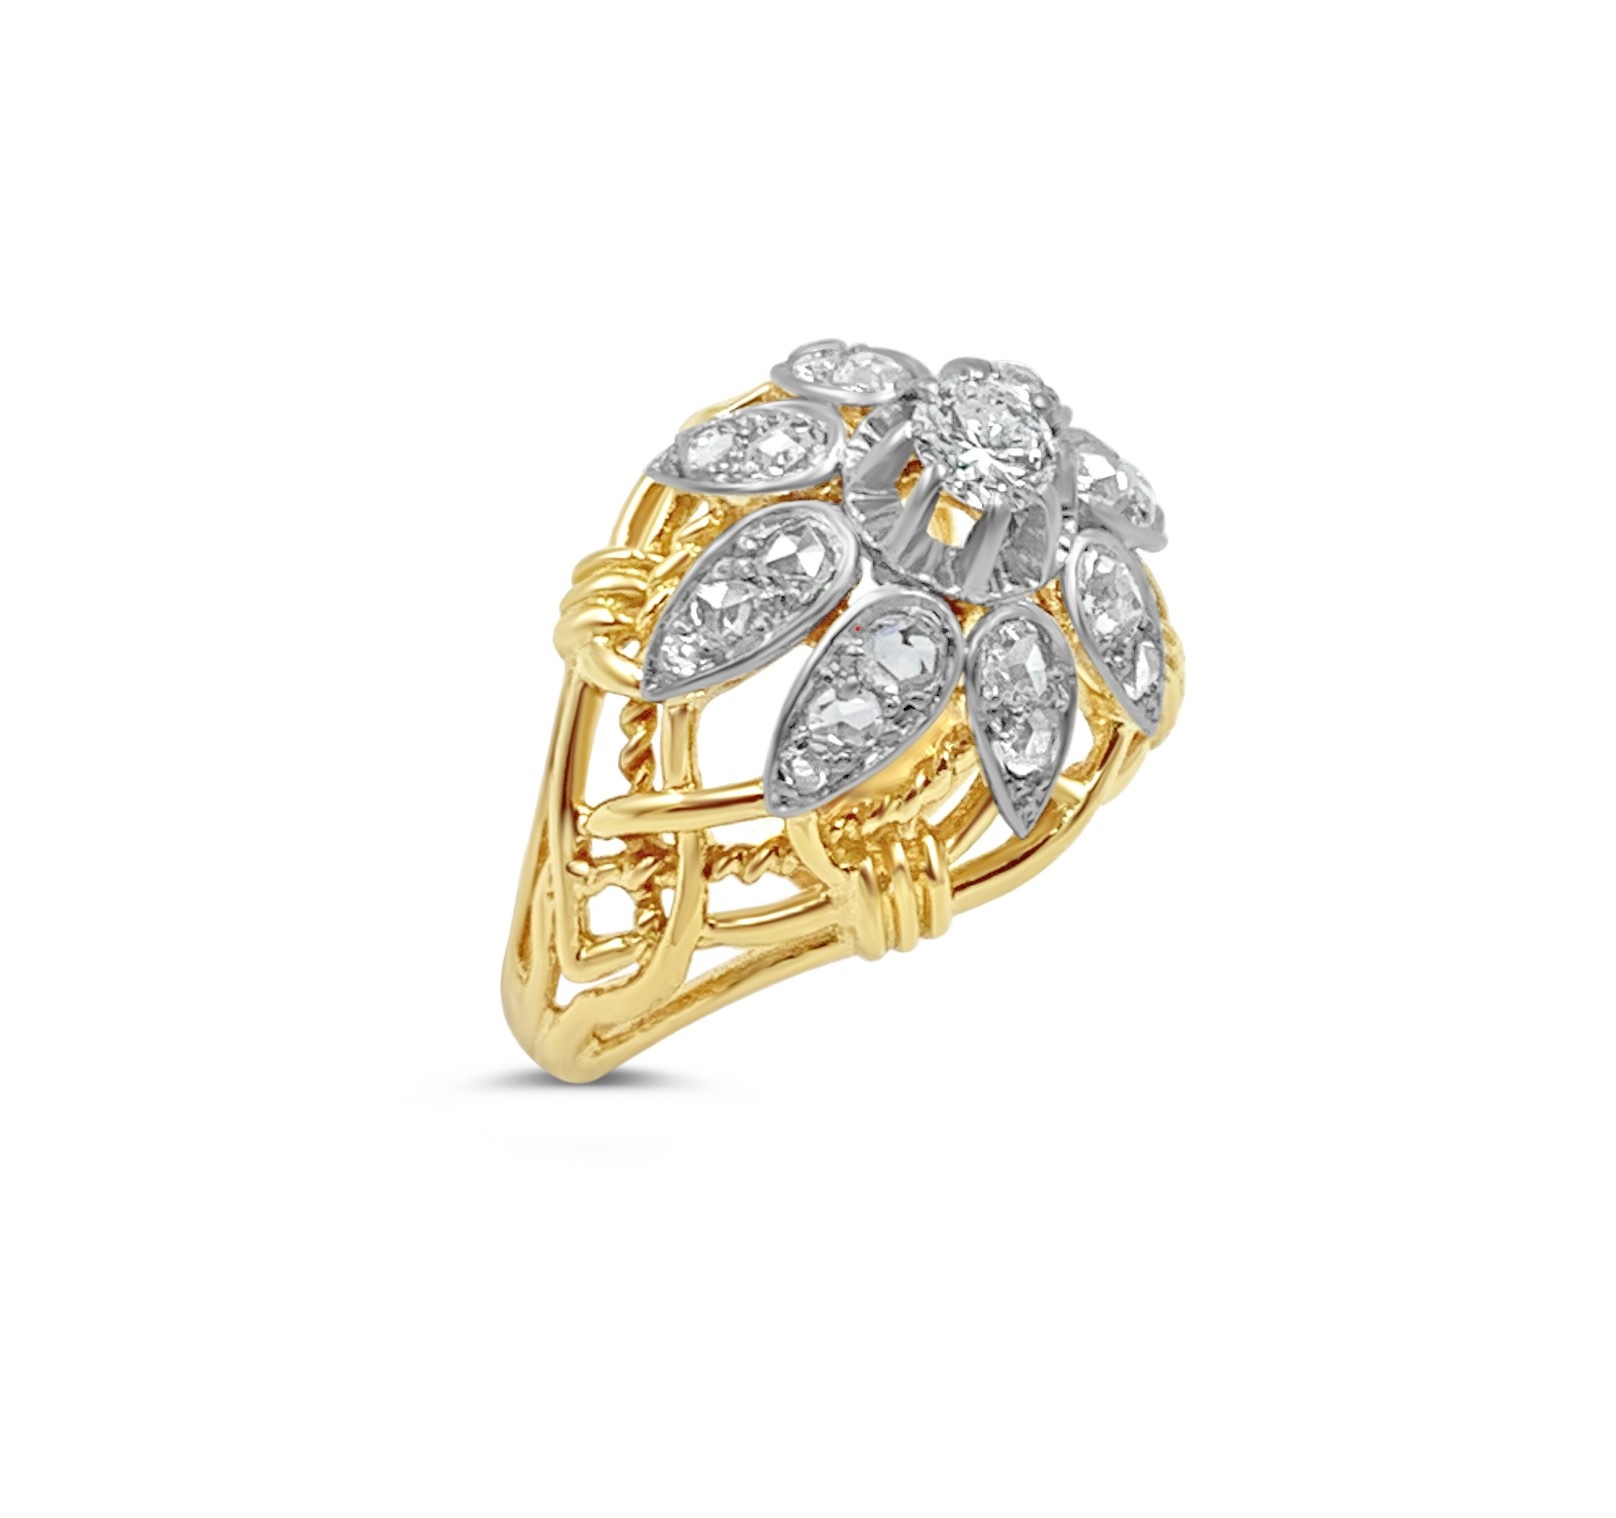 Vintage 18k yellow & white gold ring with 0.75 ct diamonds